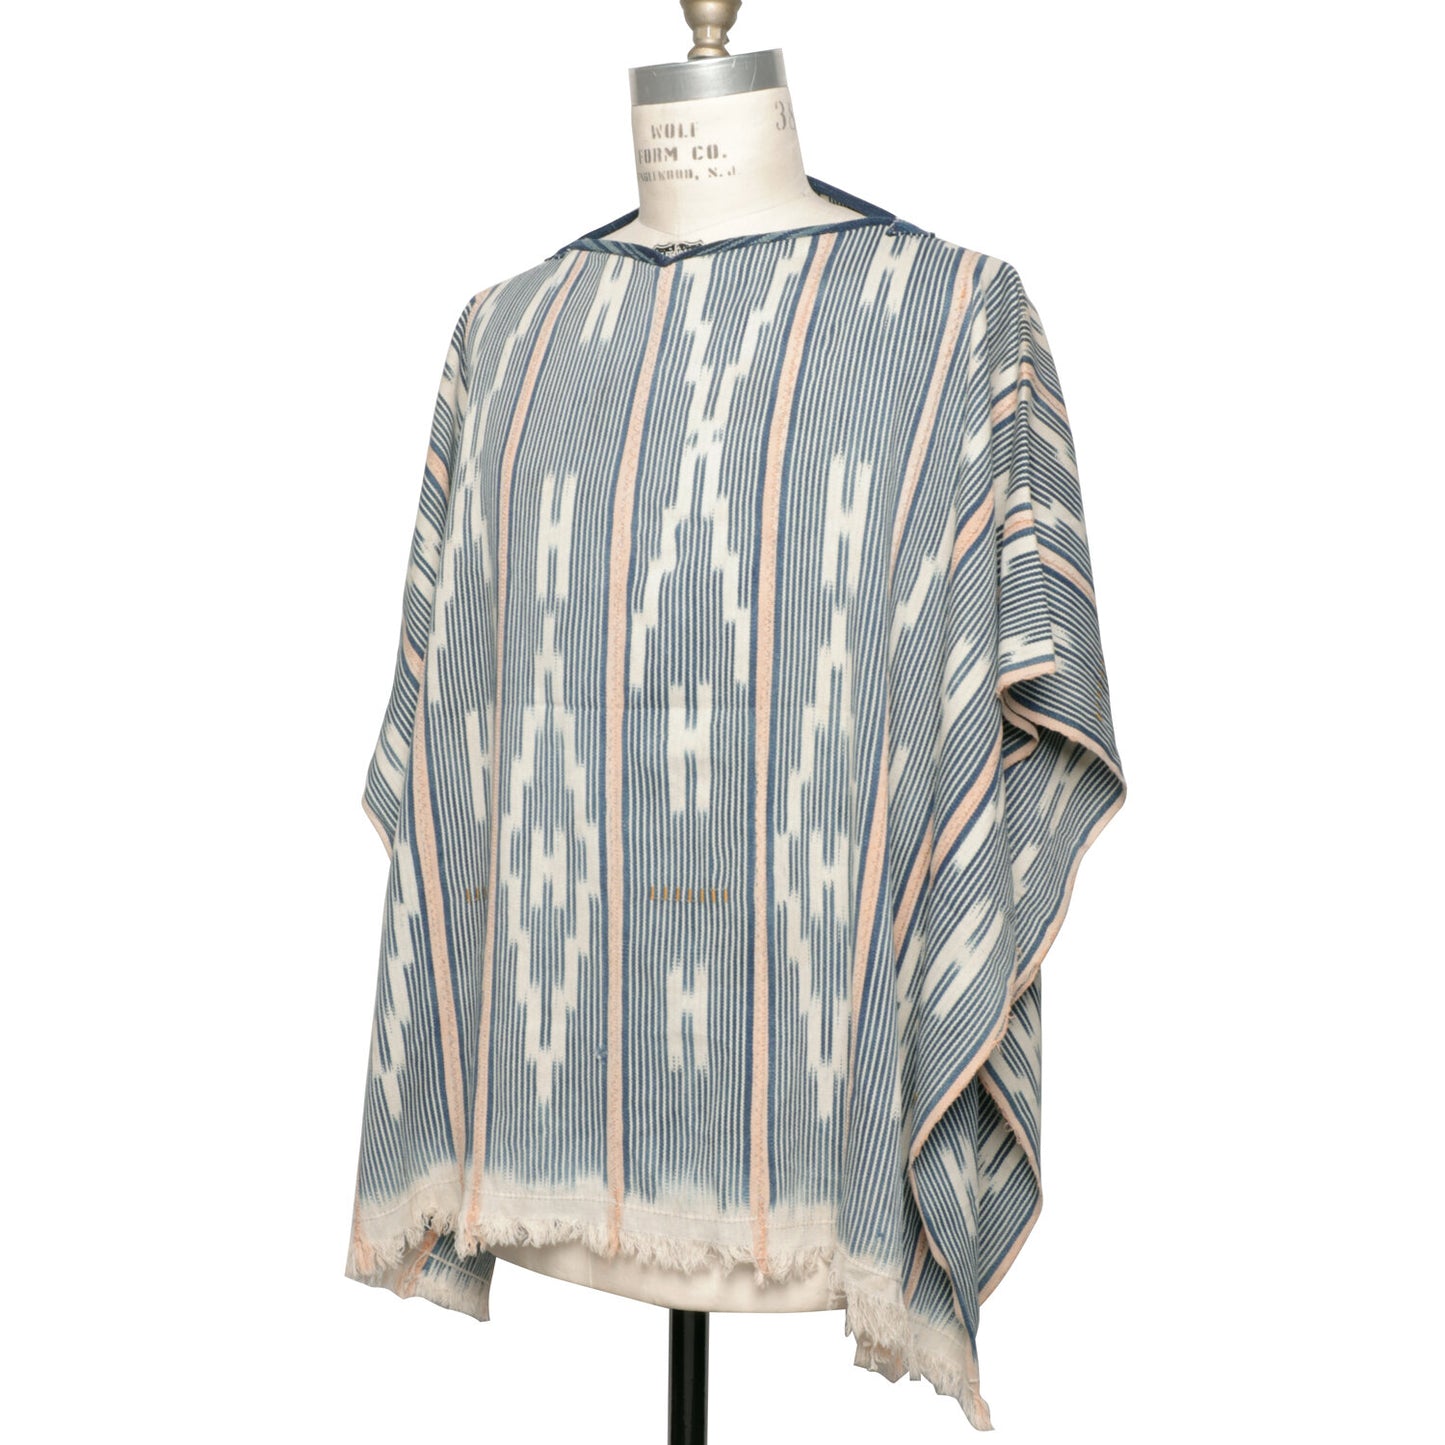 MONITALY M29501 PONCHO - HANDWOVEN AFRICAN INDIGO CLOTH, STRIPE (ONE OF A KIND)